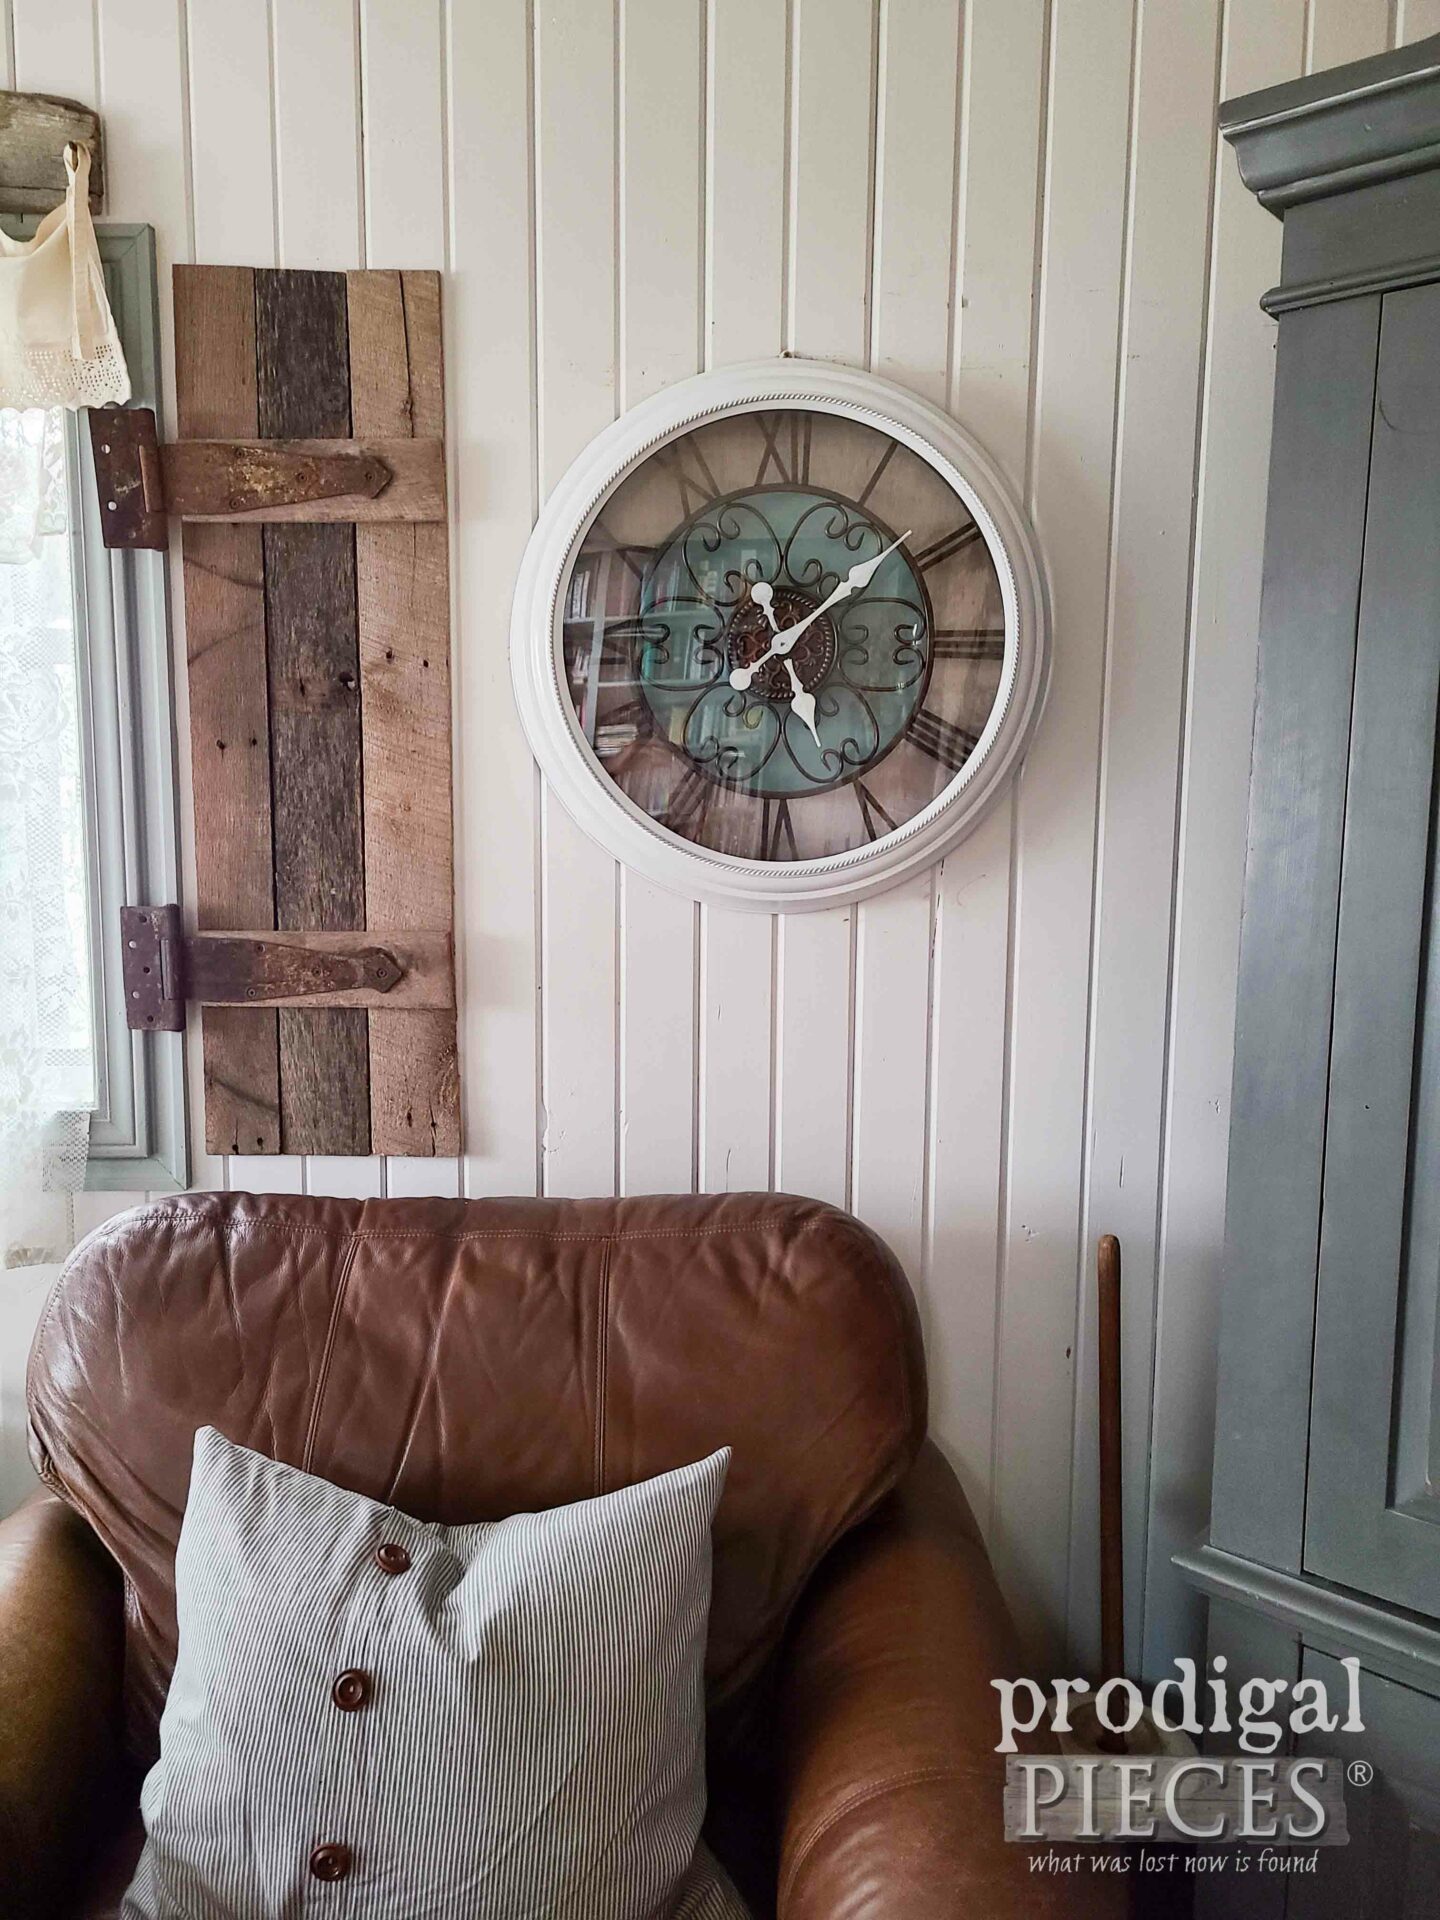 Thrift Store Wall Clock Updated to Farmhouse Style by Larissa of Prodigal Pieces | prodigalpieces.com #prodigalpieces #diy #budgetdecor #farmhouse